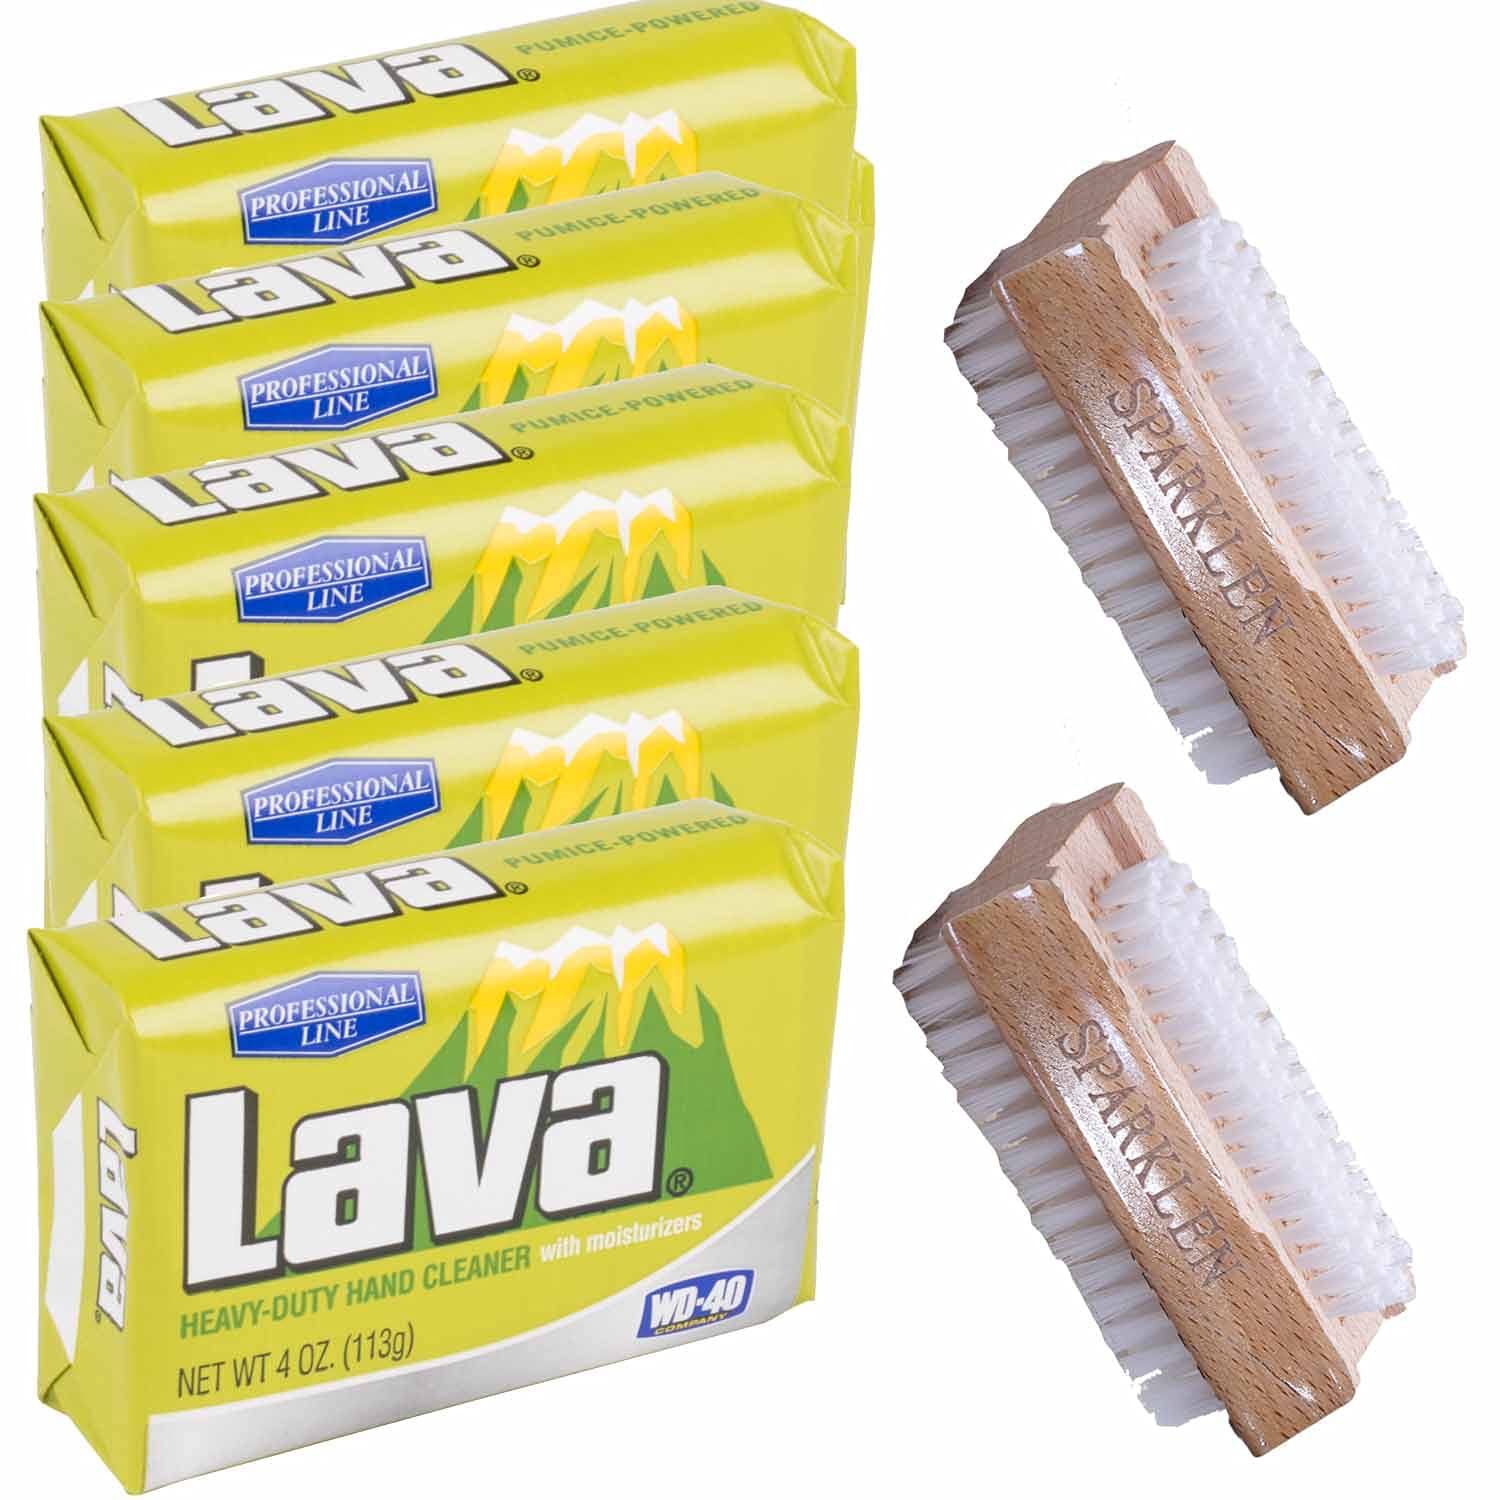 Tatane Lava Heavy-Duty Hand Cleaner Pumice soap with Moisturizers